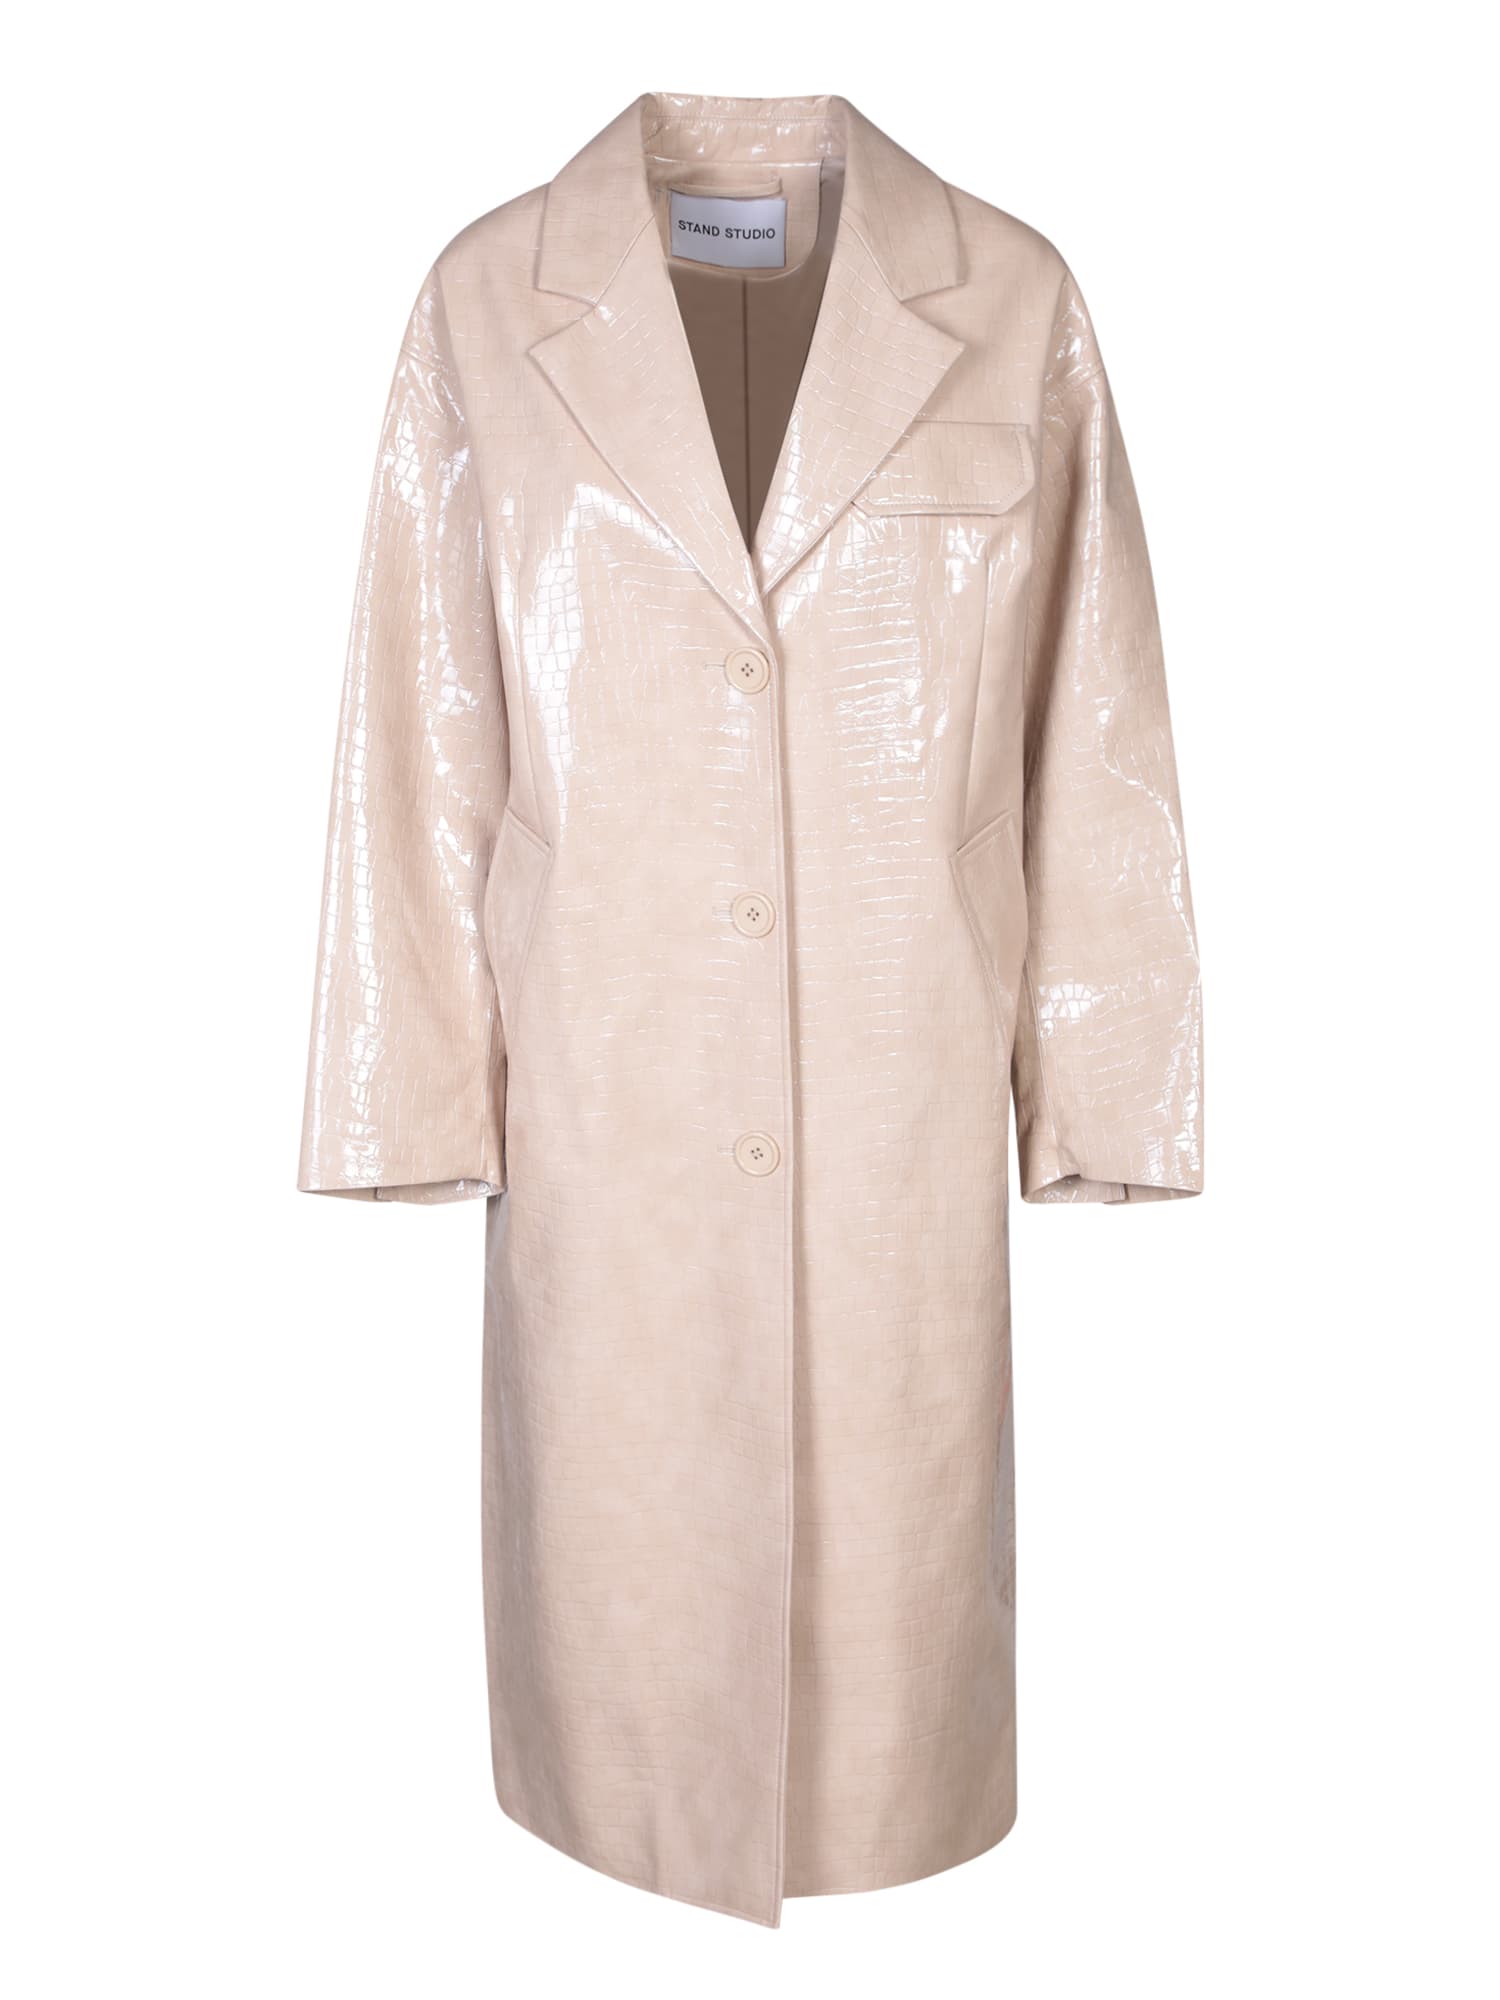 Shop Stand Studio Haylo Croco Ivory Trench In White